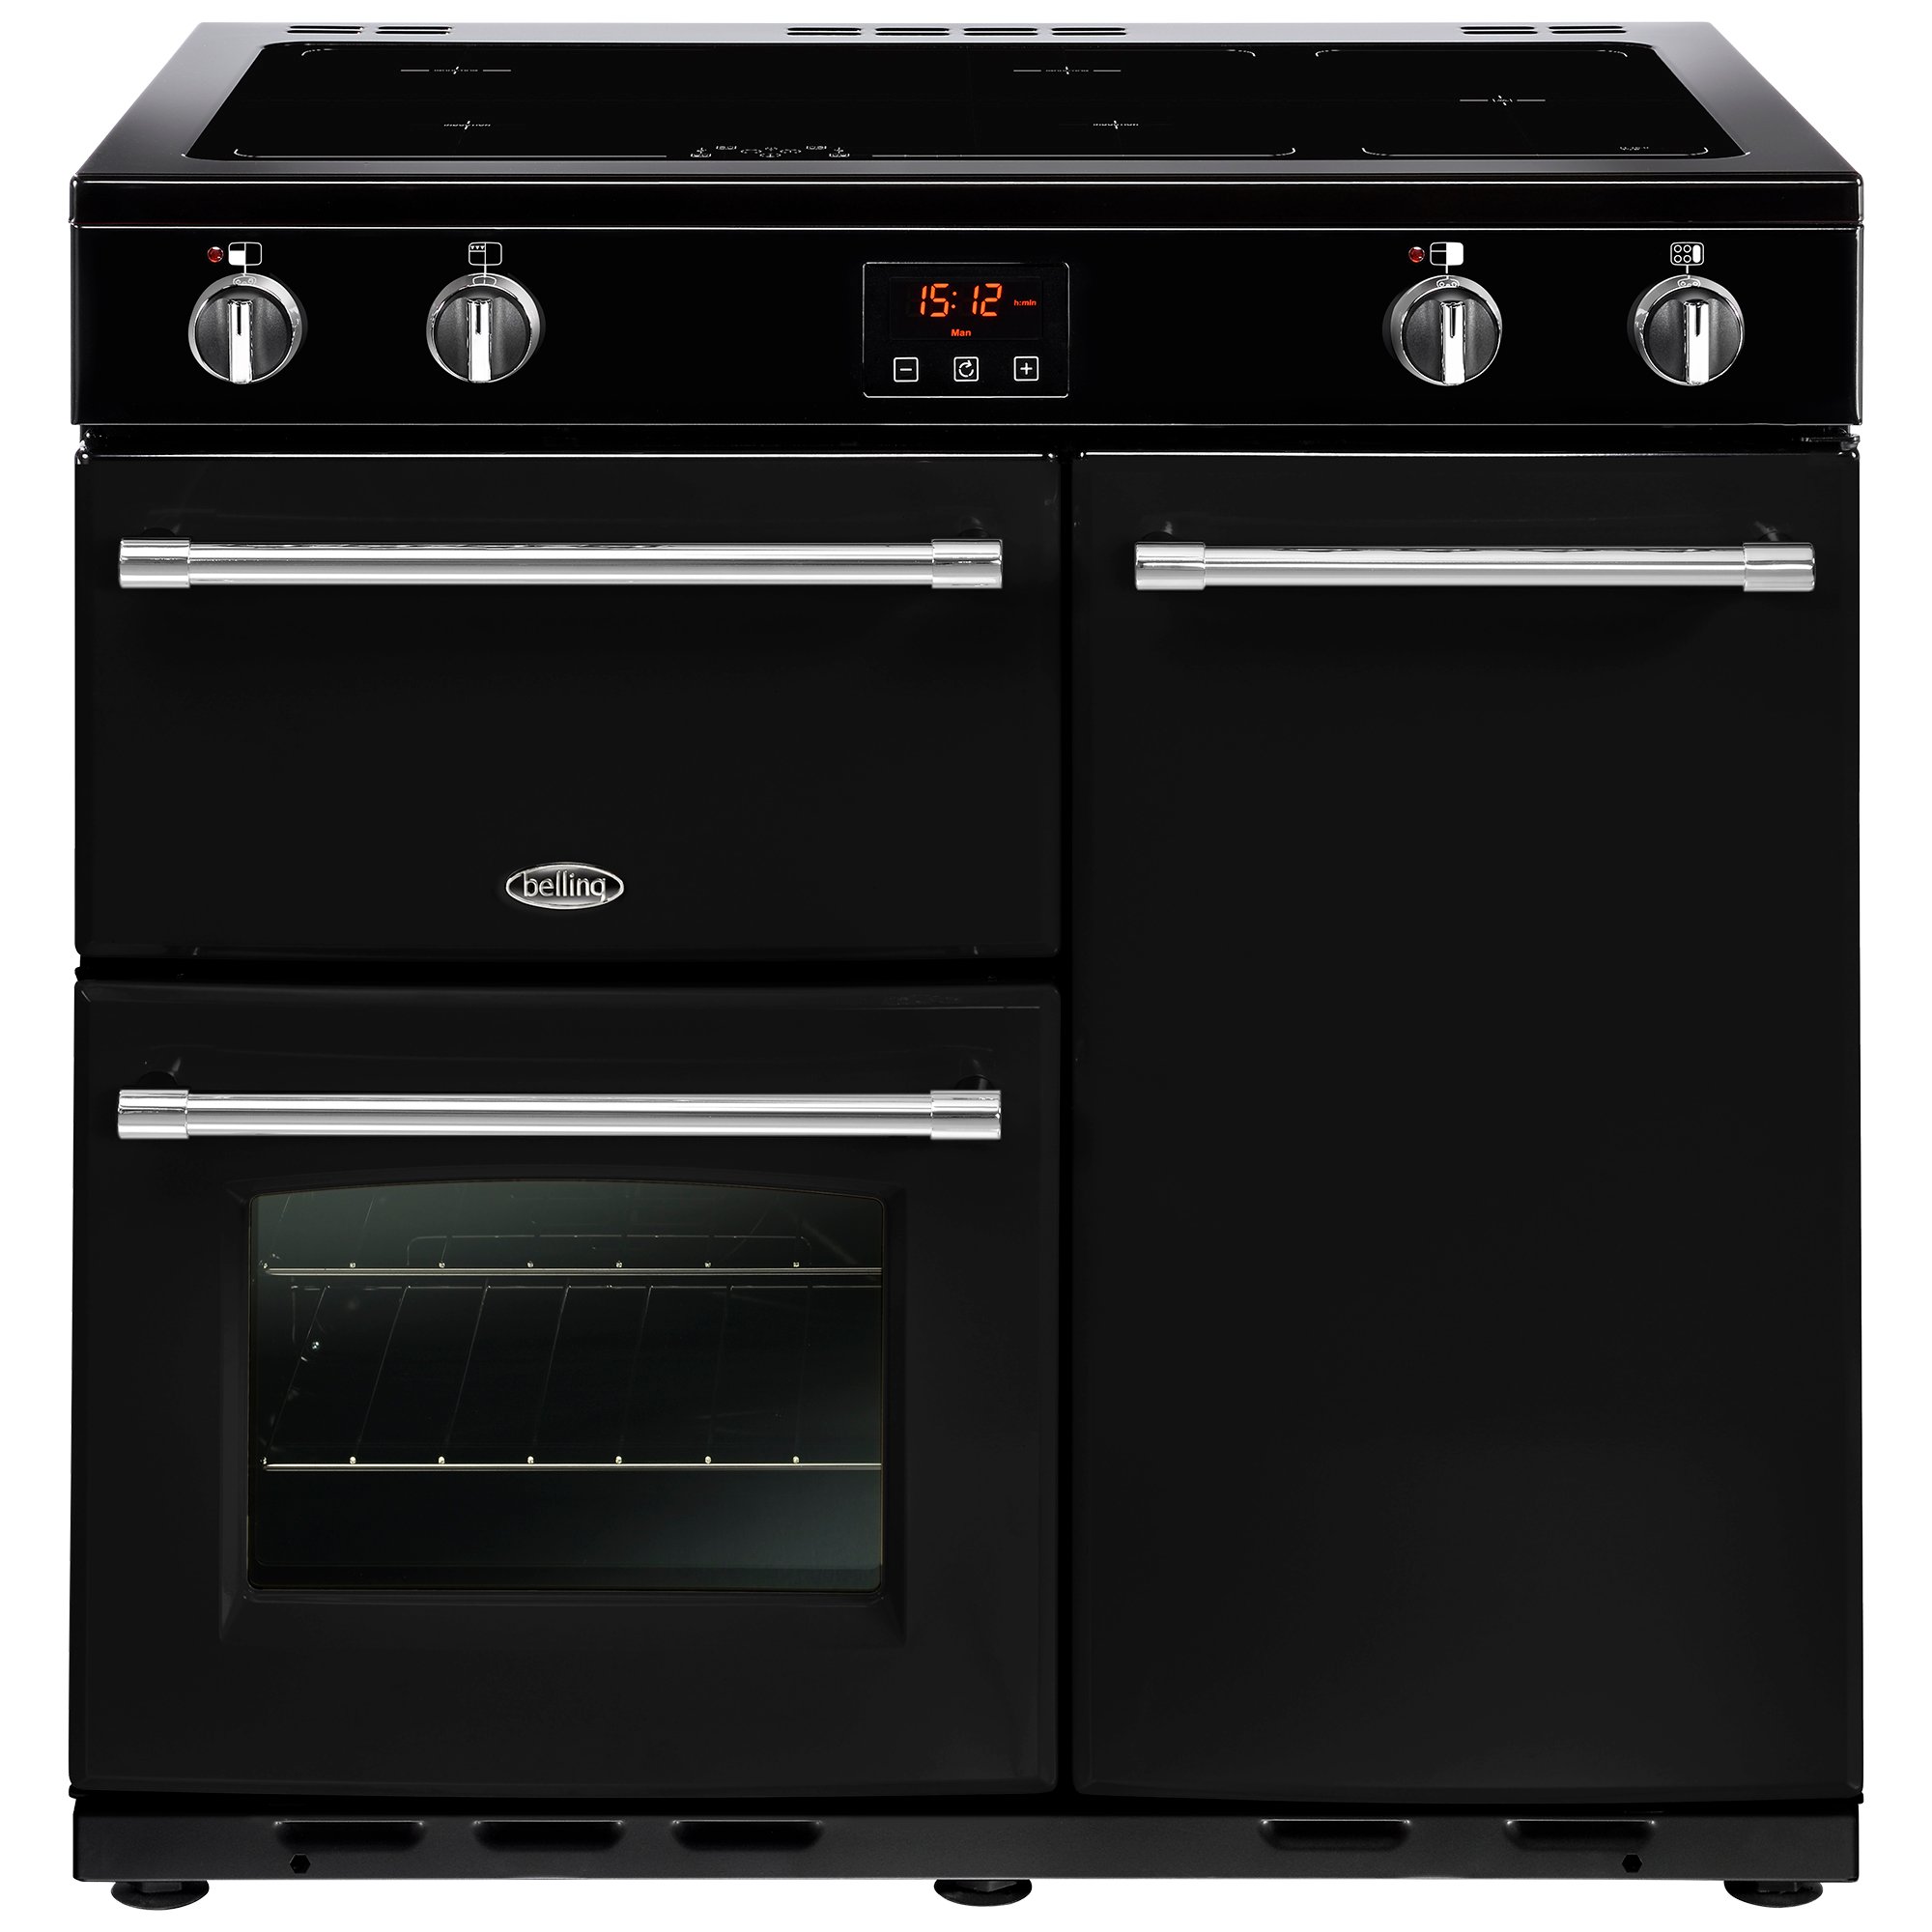 90cm electric range cooker with induction, Maxi-Clock, 91 litre market leading tall oven and easy clean enamel. Requires 32A connection.